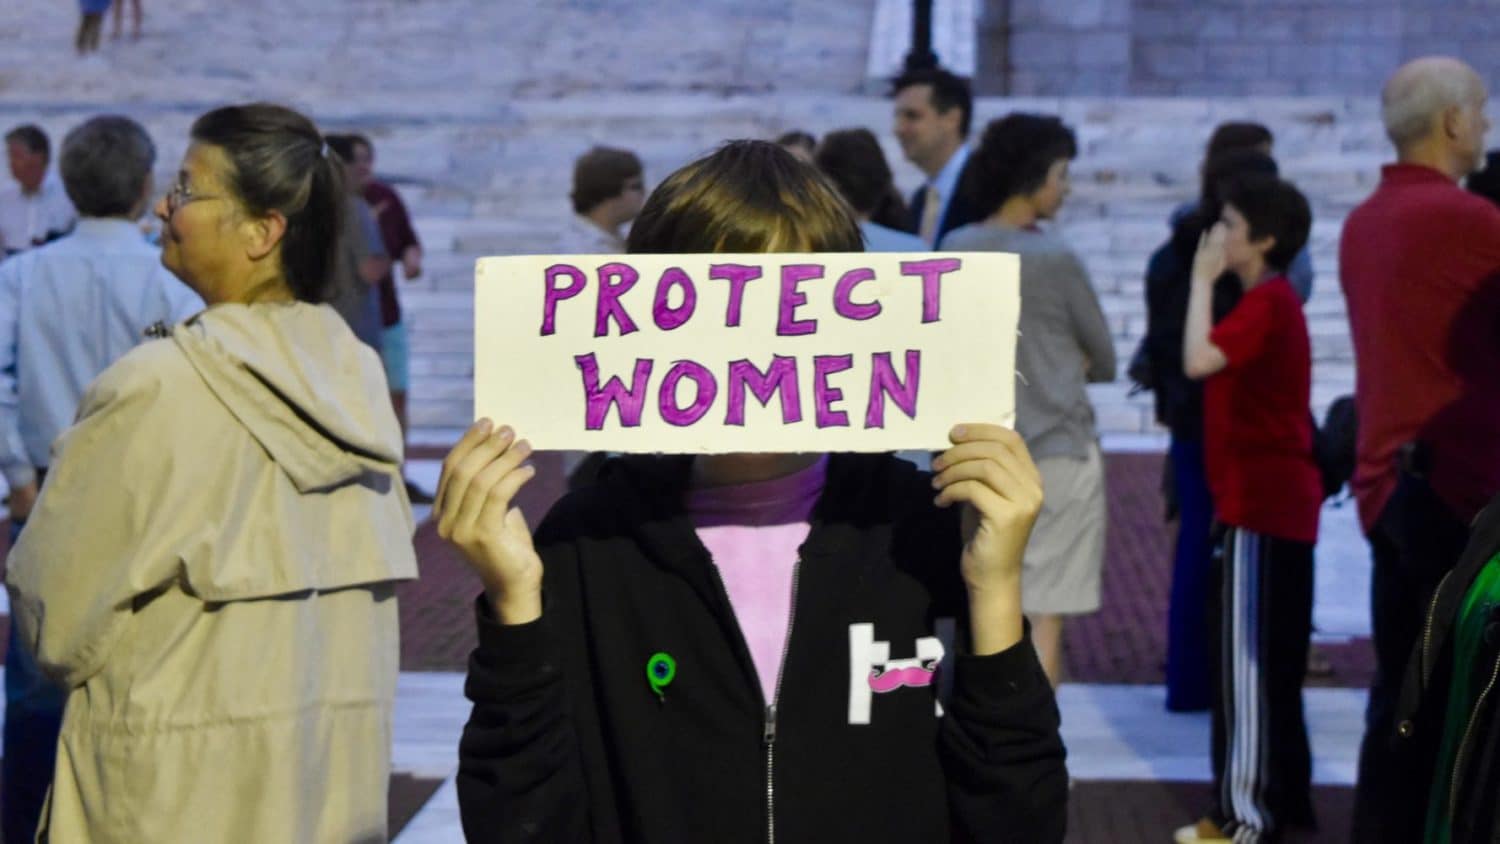 The Womxn Project: Research shows voters oppose bans on abortion